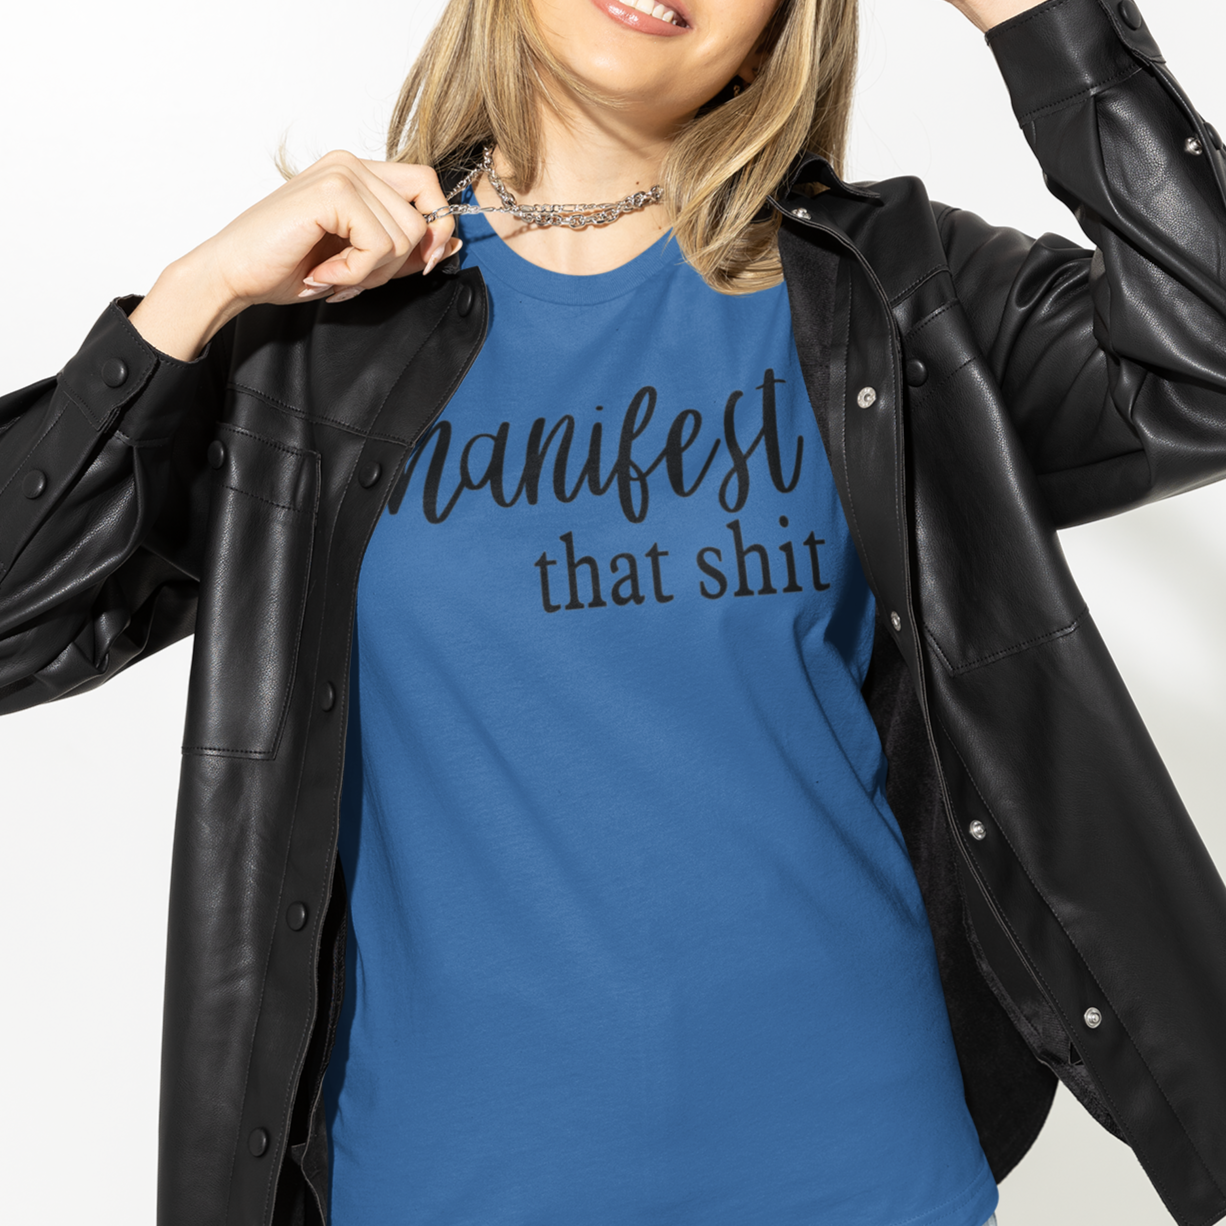 manifest-that-shit-true-royal-blue-t-shirt-womens-tee-bella-canvas-mockup-of-a-woman-in-a-studio-wearing-a-leather-jacket